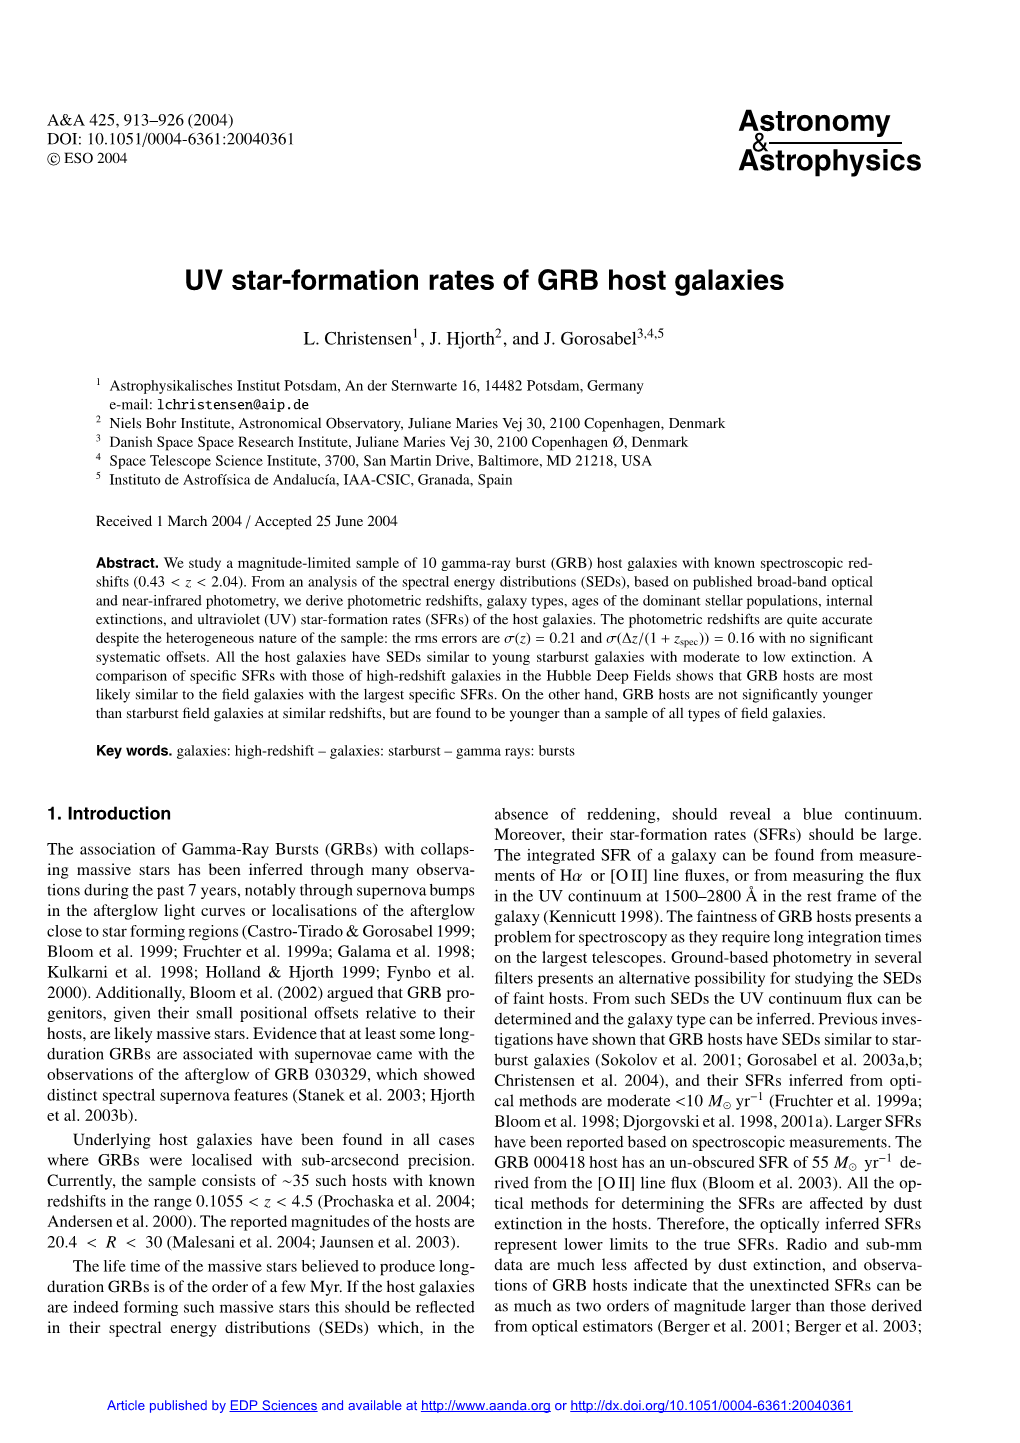 UV Star-Formation Rates of GRB Host Galaxies